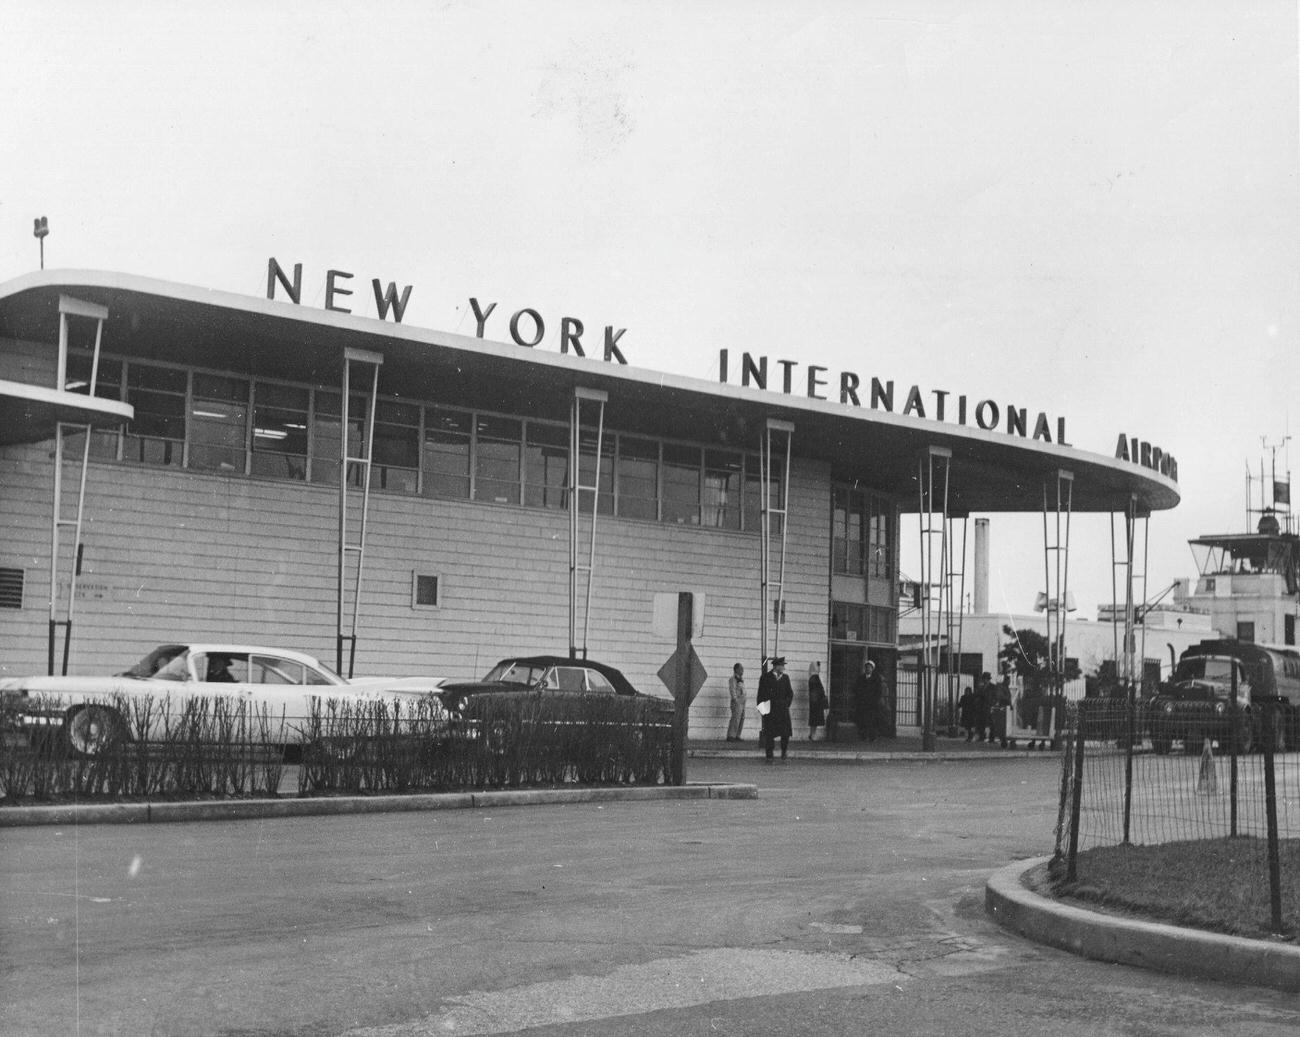 The New York International Building At Idlewild Airport In Jamaica, New York As Seen On February 14, 1960.